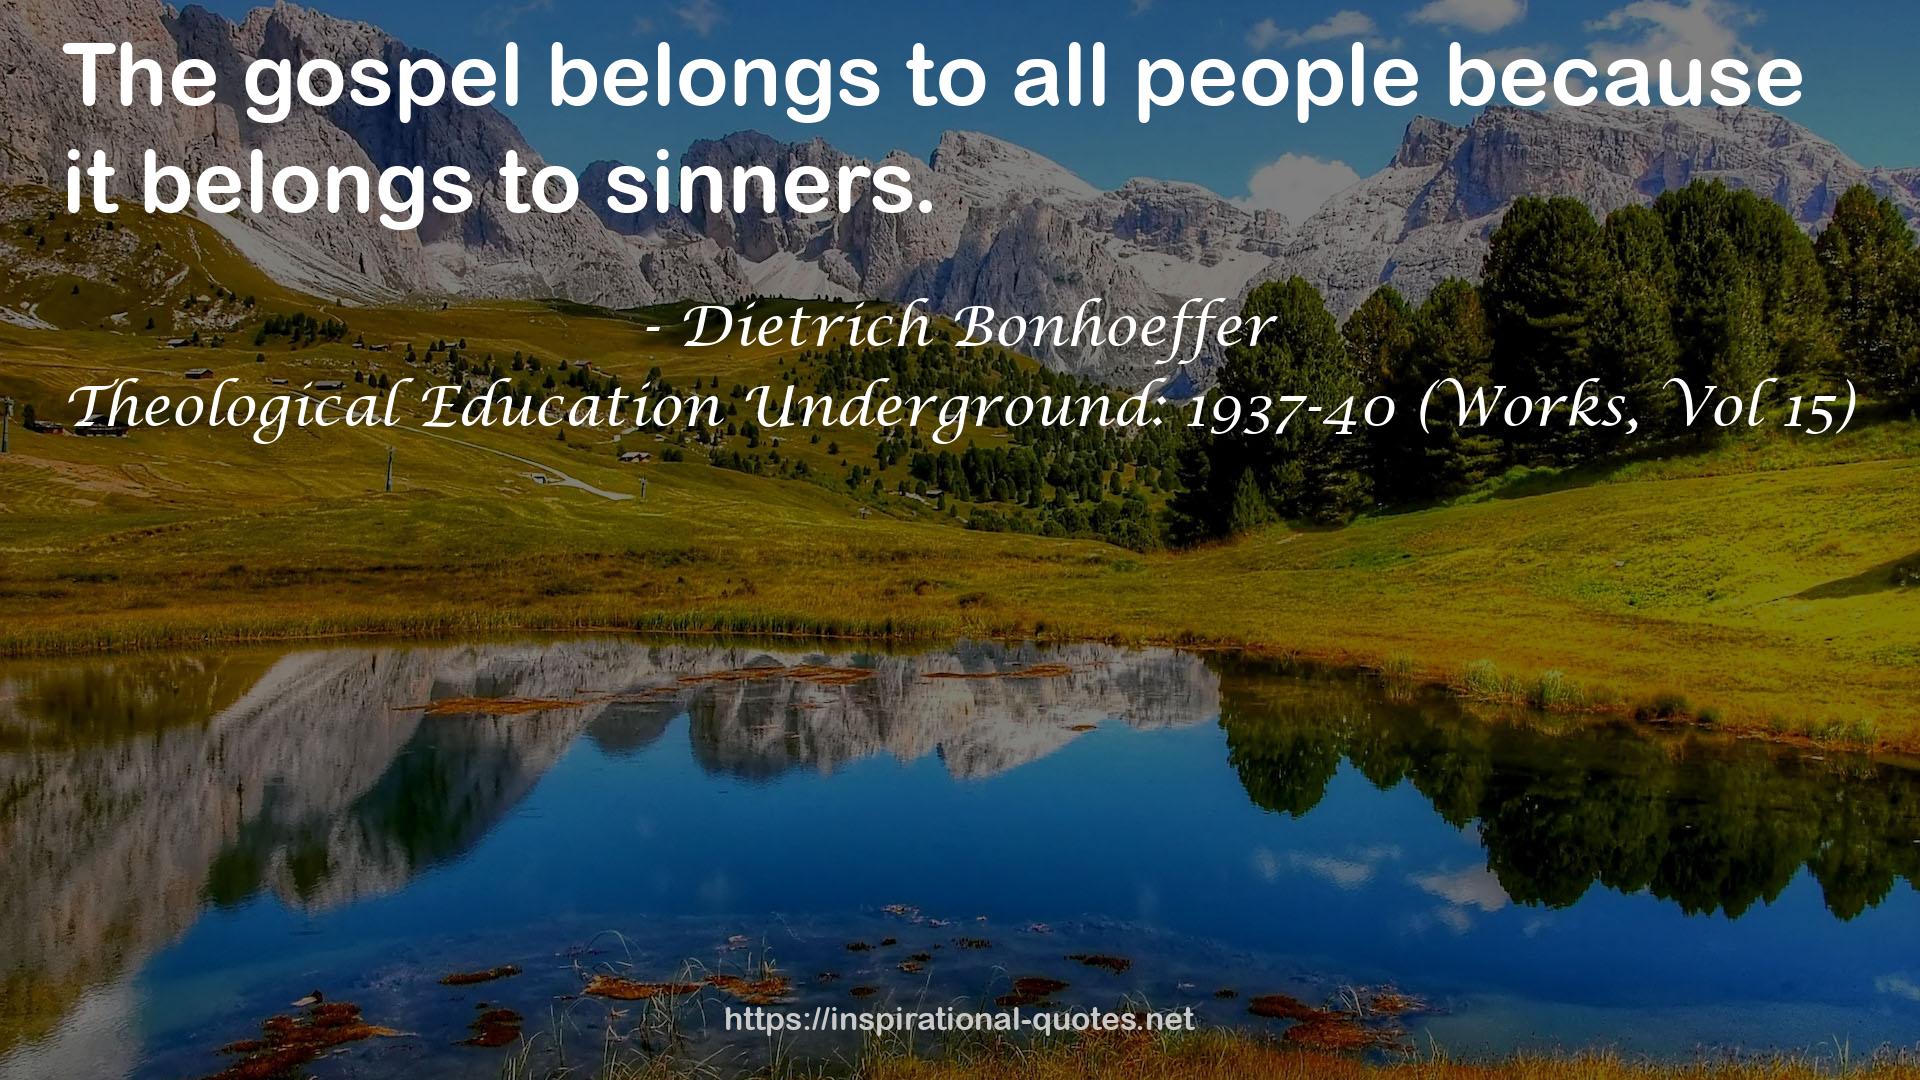 Theological Education Underground: 1937-40 (Works, Vol 15) QUOTES